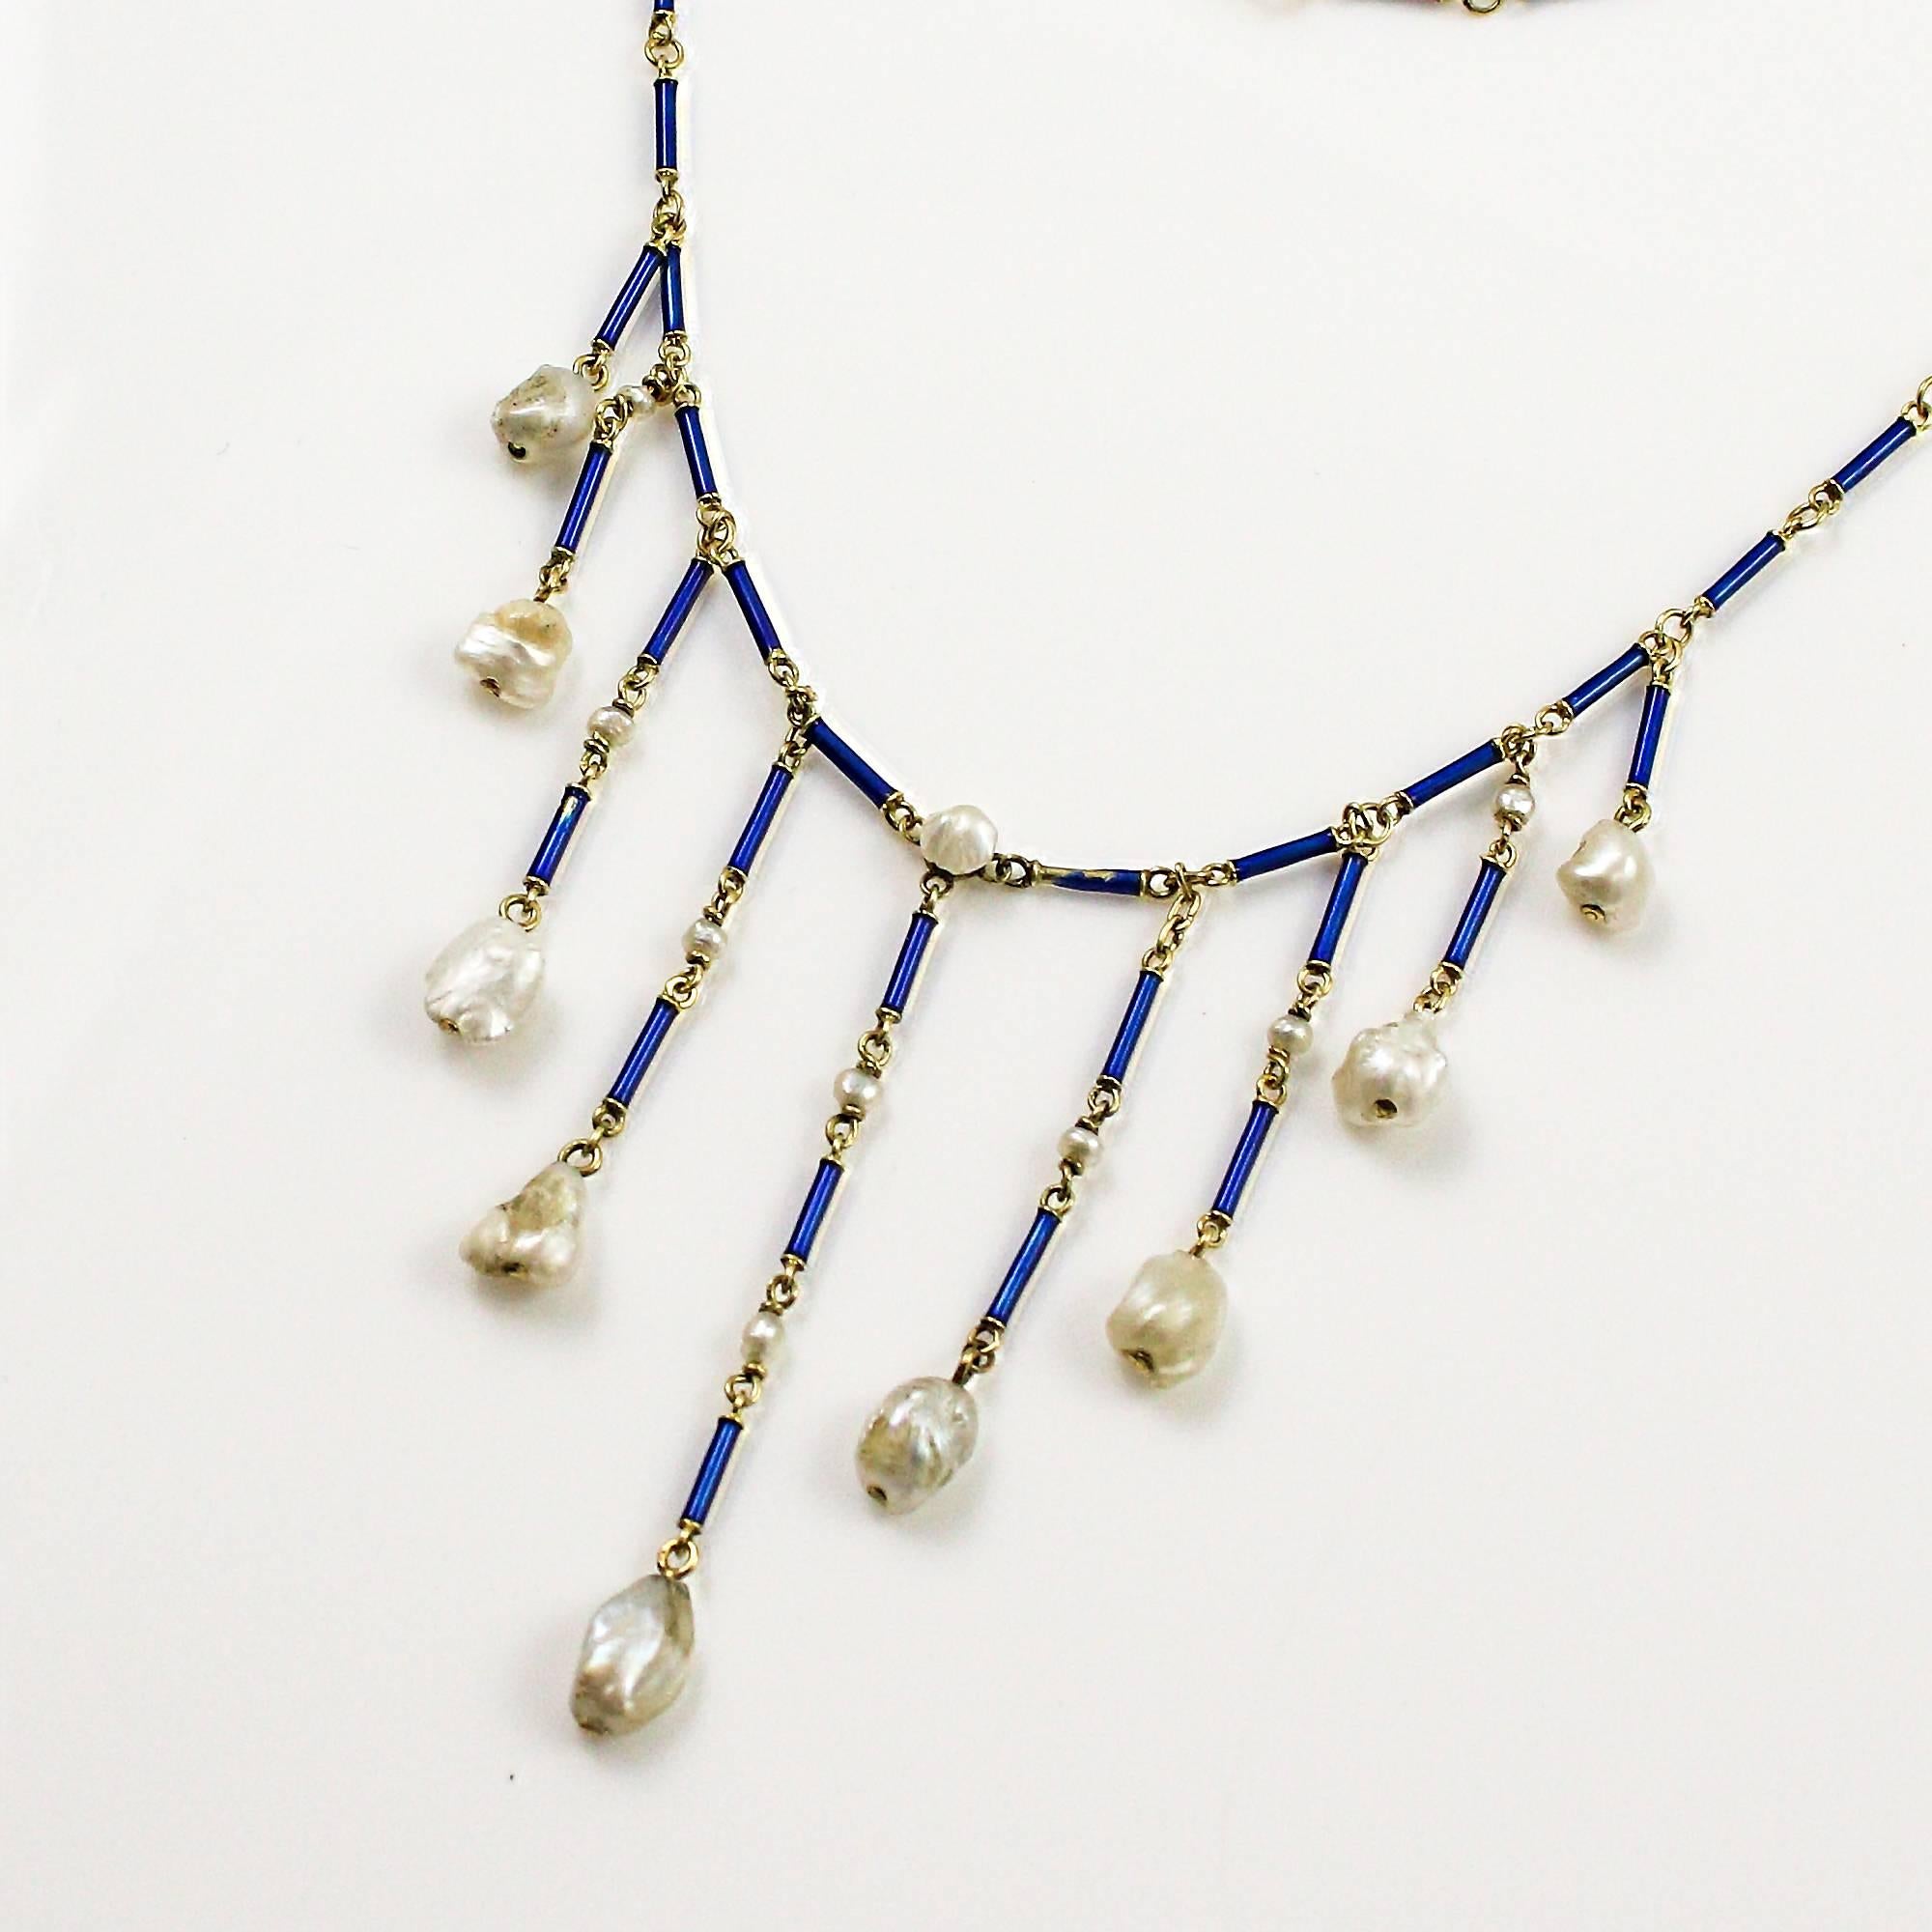 High Victorian Victorian 14k Yellow Gold Festoon Style Blue Enamel and Natural Pearl Necklace